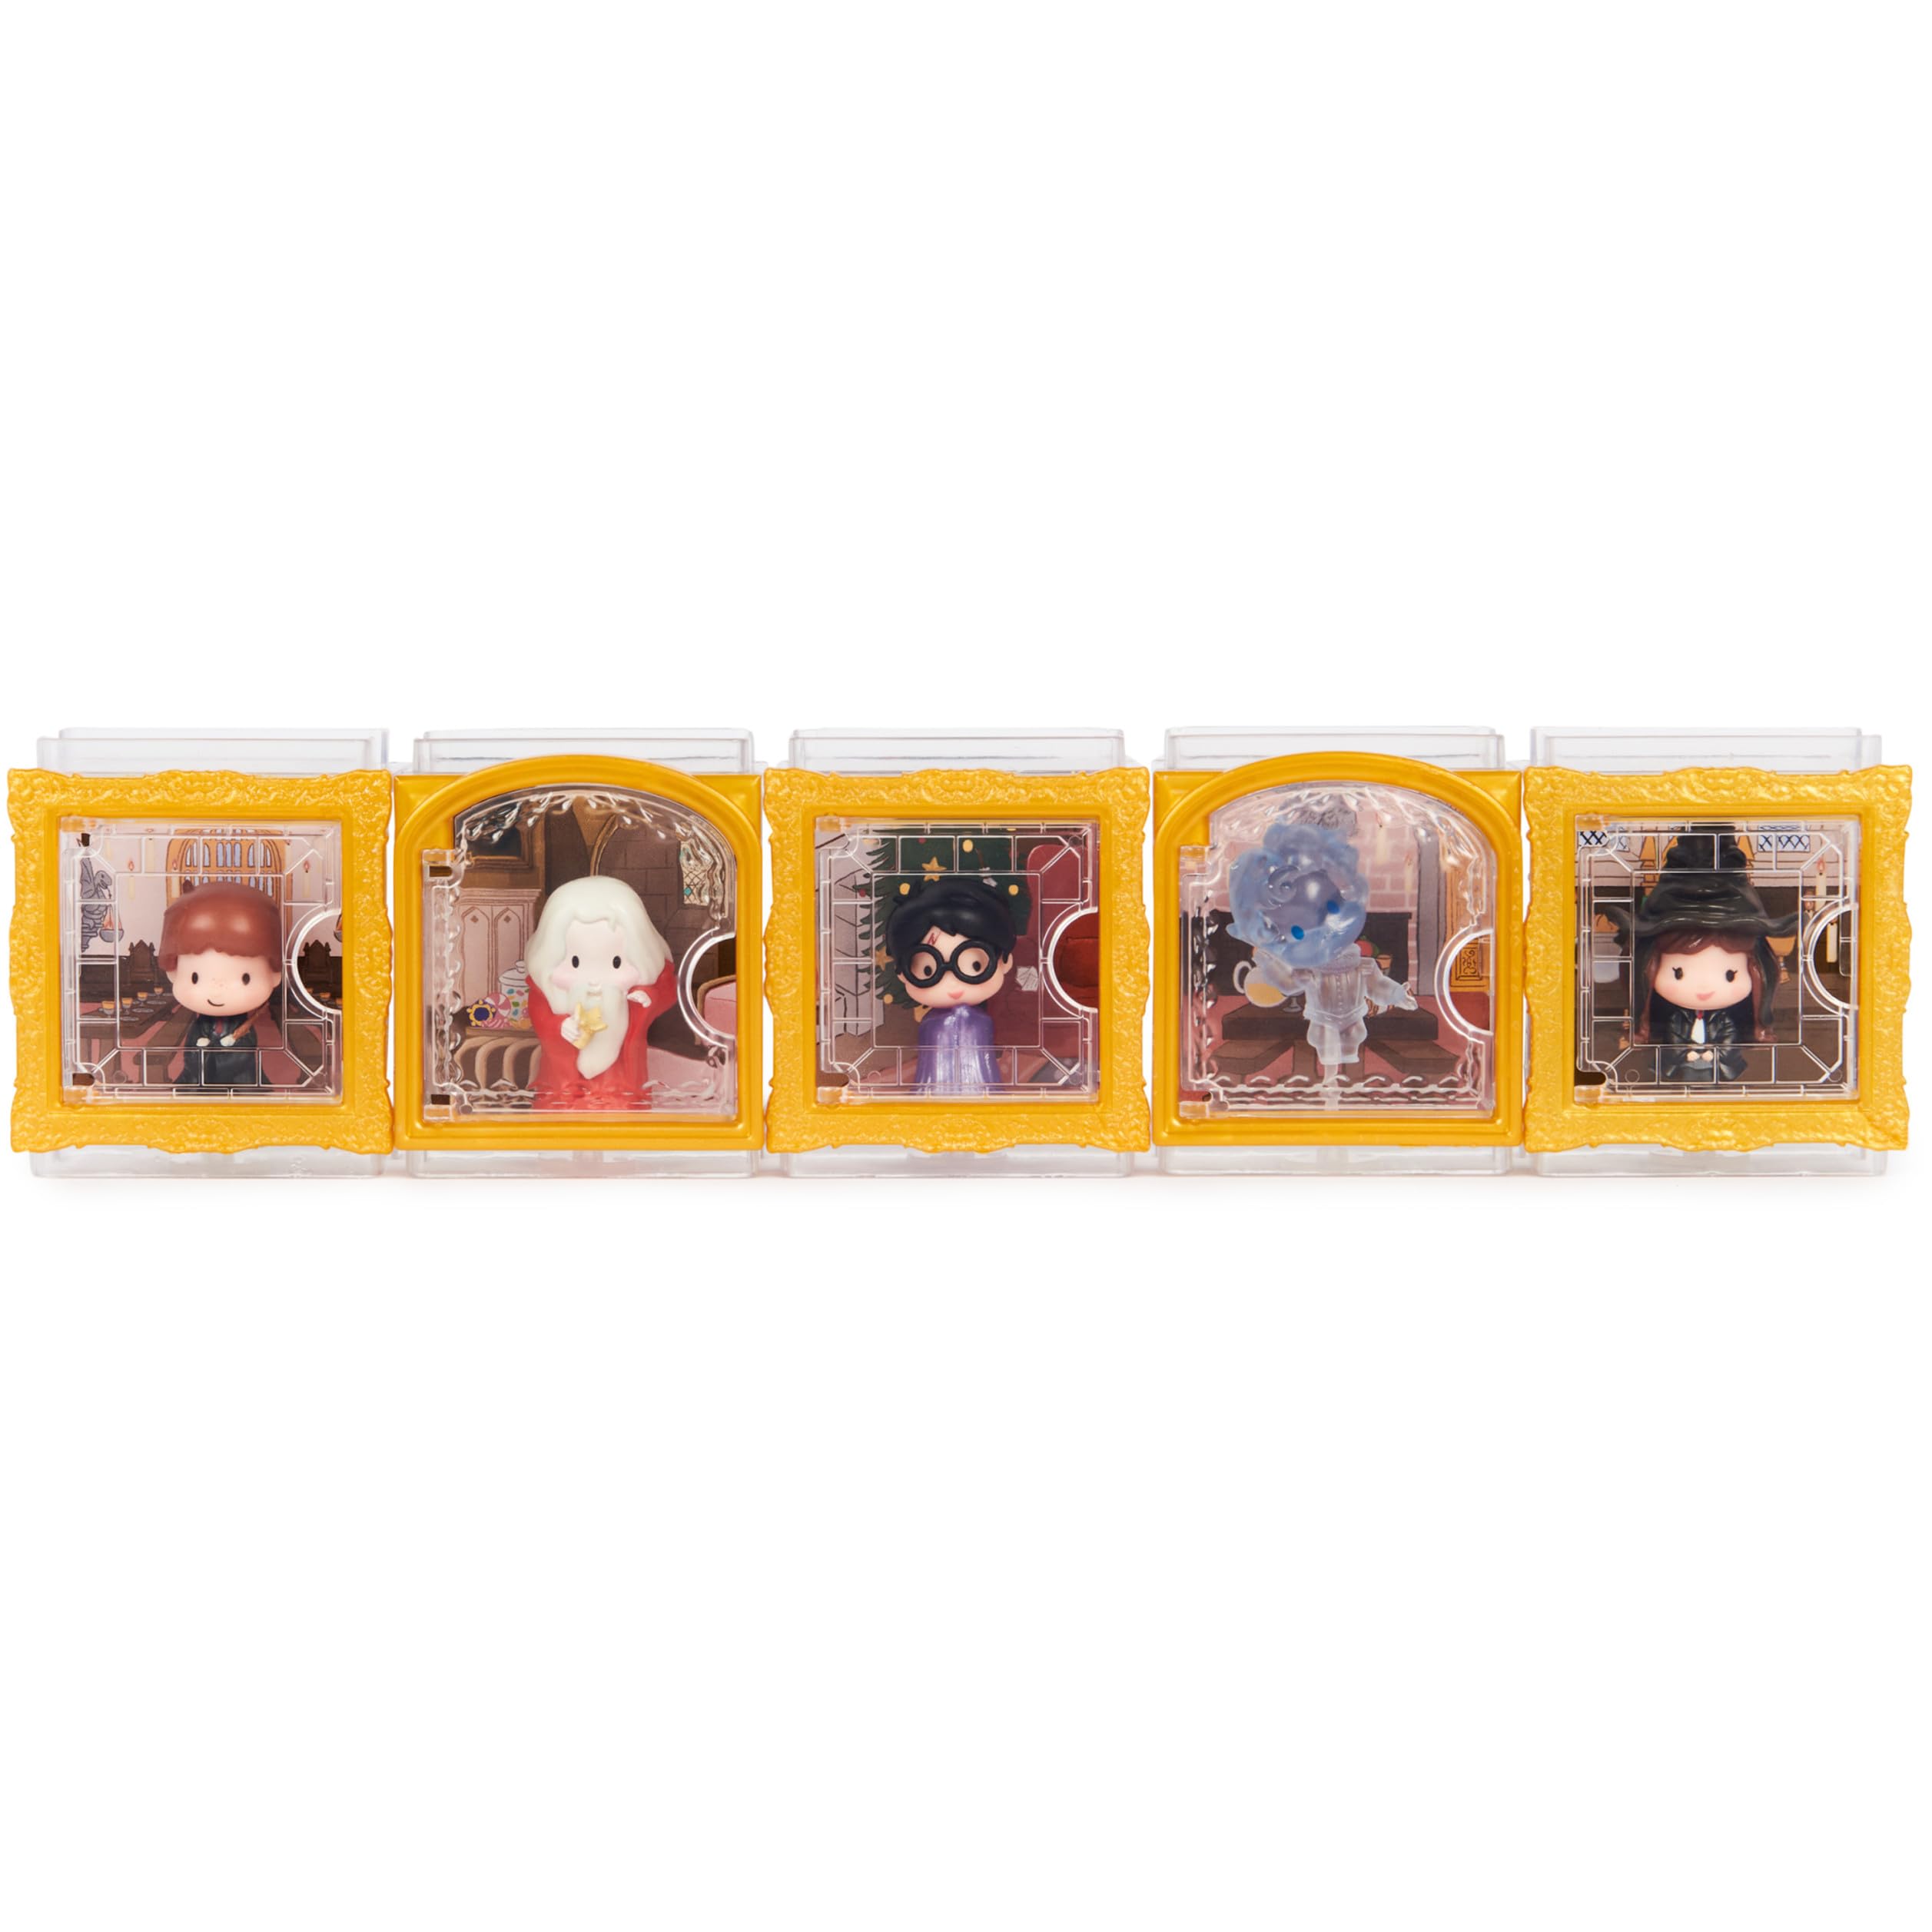 Wizarding World Harry Potter, Micro Magical Moments Hogwarts 5-Pack Mini Figures Gift Set with Display Cases (Amazon Exclusive), Kids Toys for Ages 6+